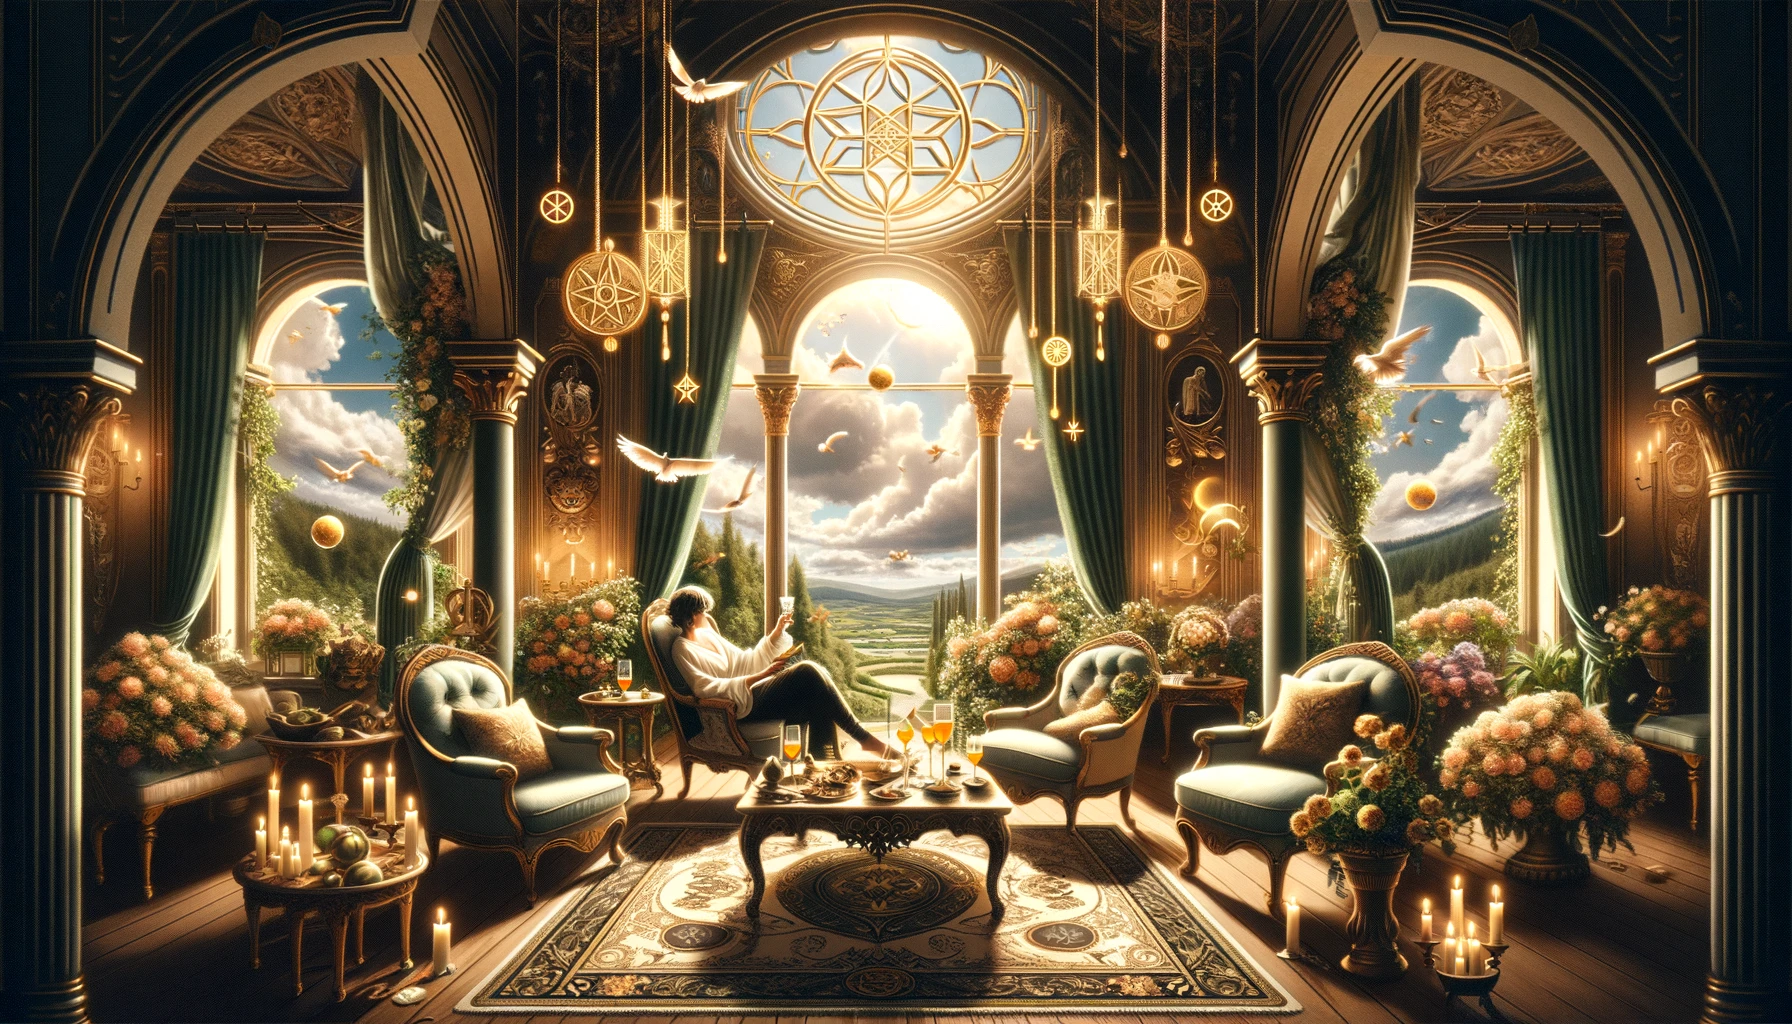 The image illustrates the essence of independence, self-sufficiency, and personal achievement. It features an individual radiating emotional satisfaction and stability through self-reliance and hard work. The visualization emphasizes themes of fulfillment, inner peace, and the luxury of enjoying one's own company, set against a backdrop suggesting a luxurious or abundant setting.